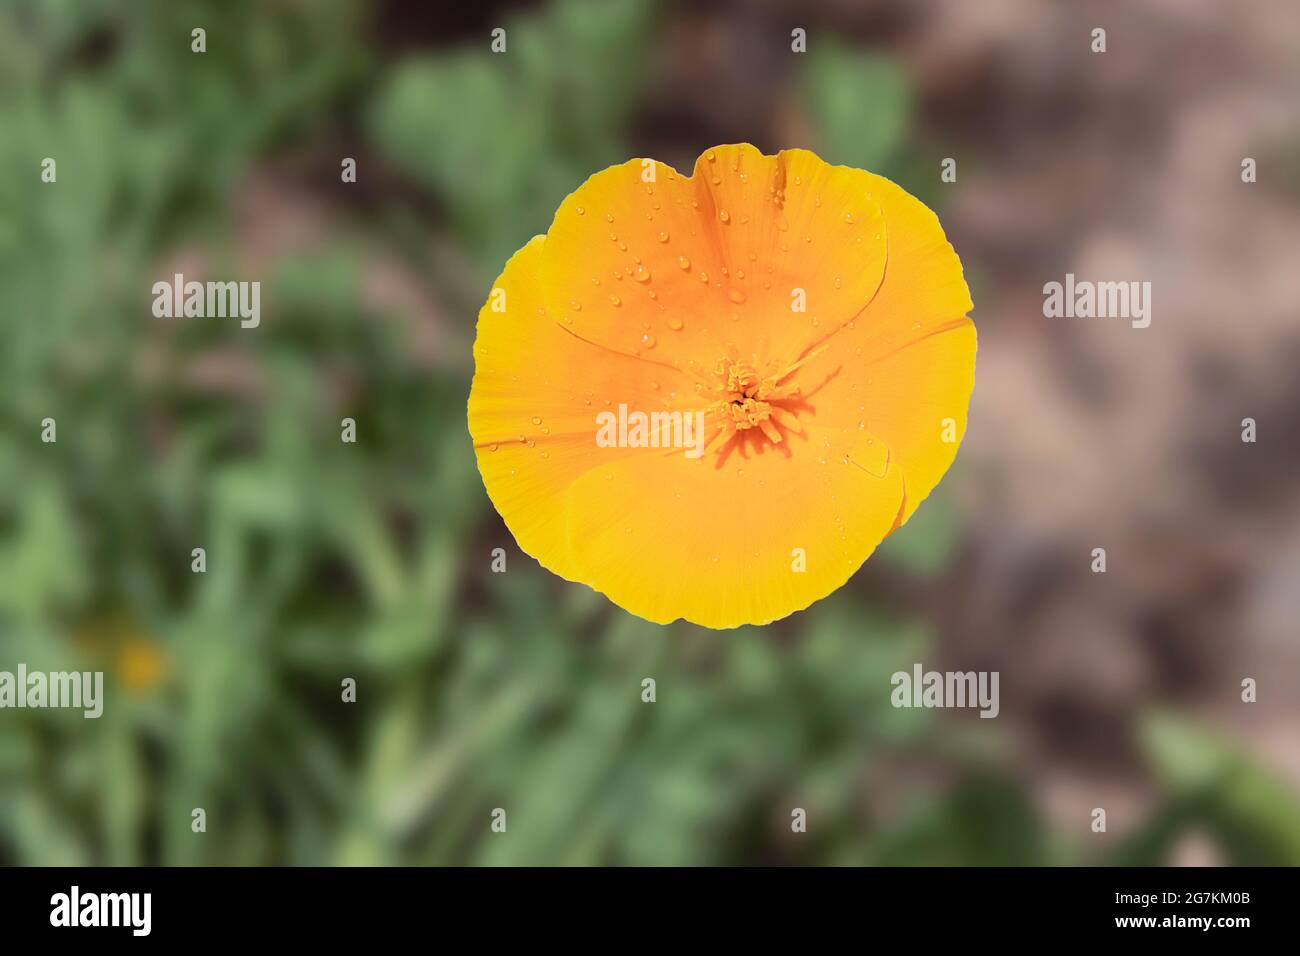 dreamy dewdrops on a softly lit golden yellow California Poppy Eschscholzia californica flower with a blurred garden background Stock Photo